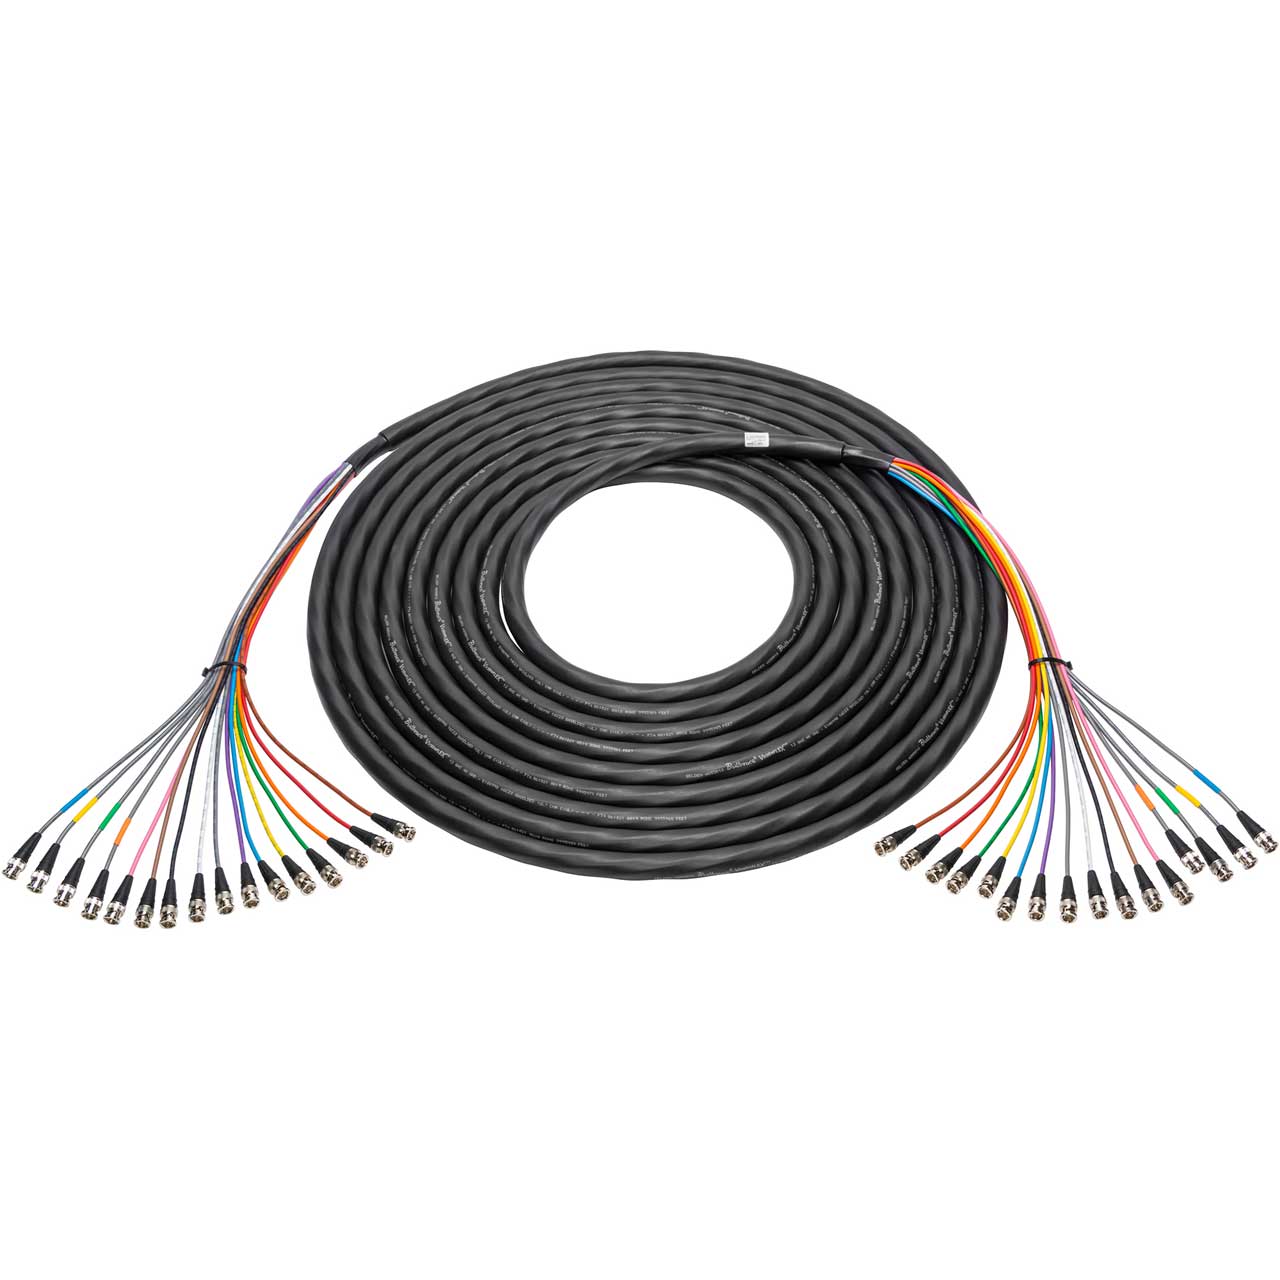 Laird 4855R16-BB-125 16-Channel 12G-SDI / 4K UHD BNC Male to BNC Male Snake Cable - 125 Foot 4855R16-BB-125